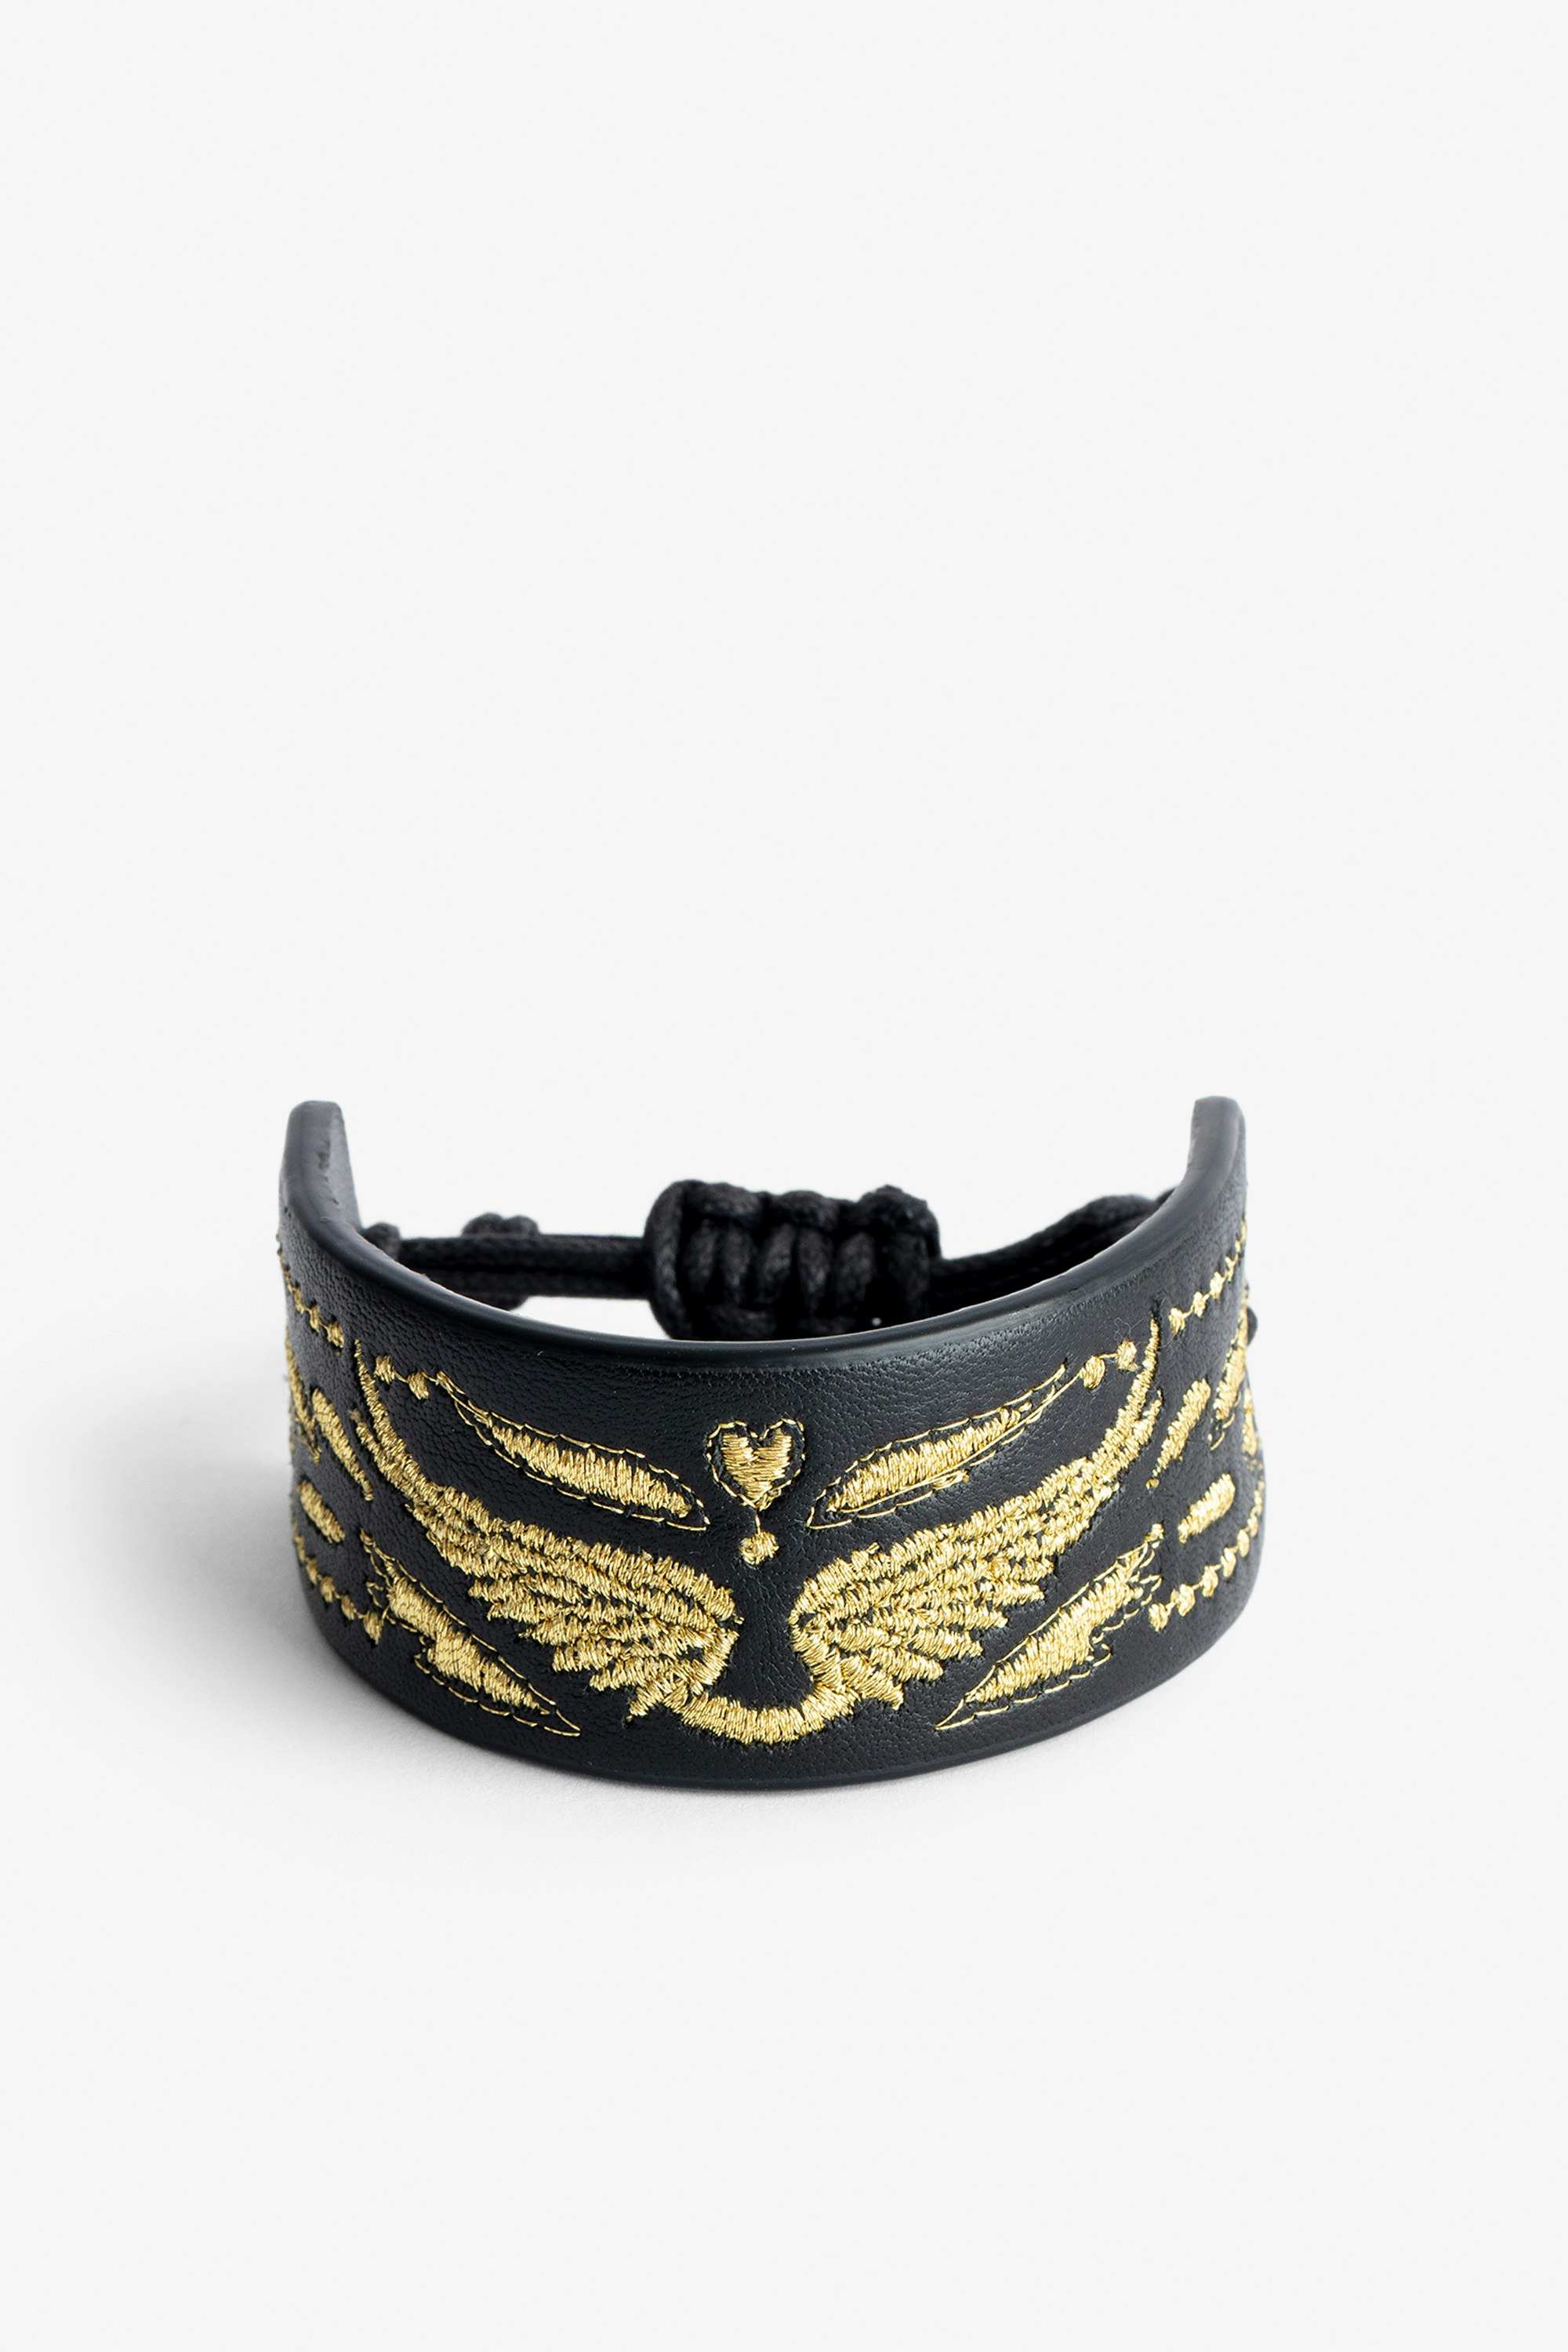 Lenny Bracelet - Voltaire Vice black leather cuff bracelet with gold-tone wings.